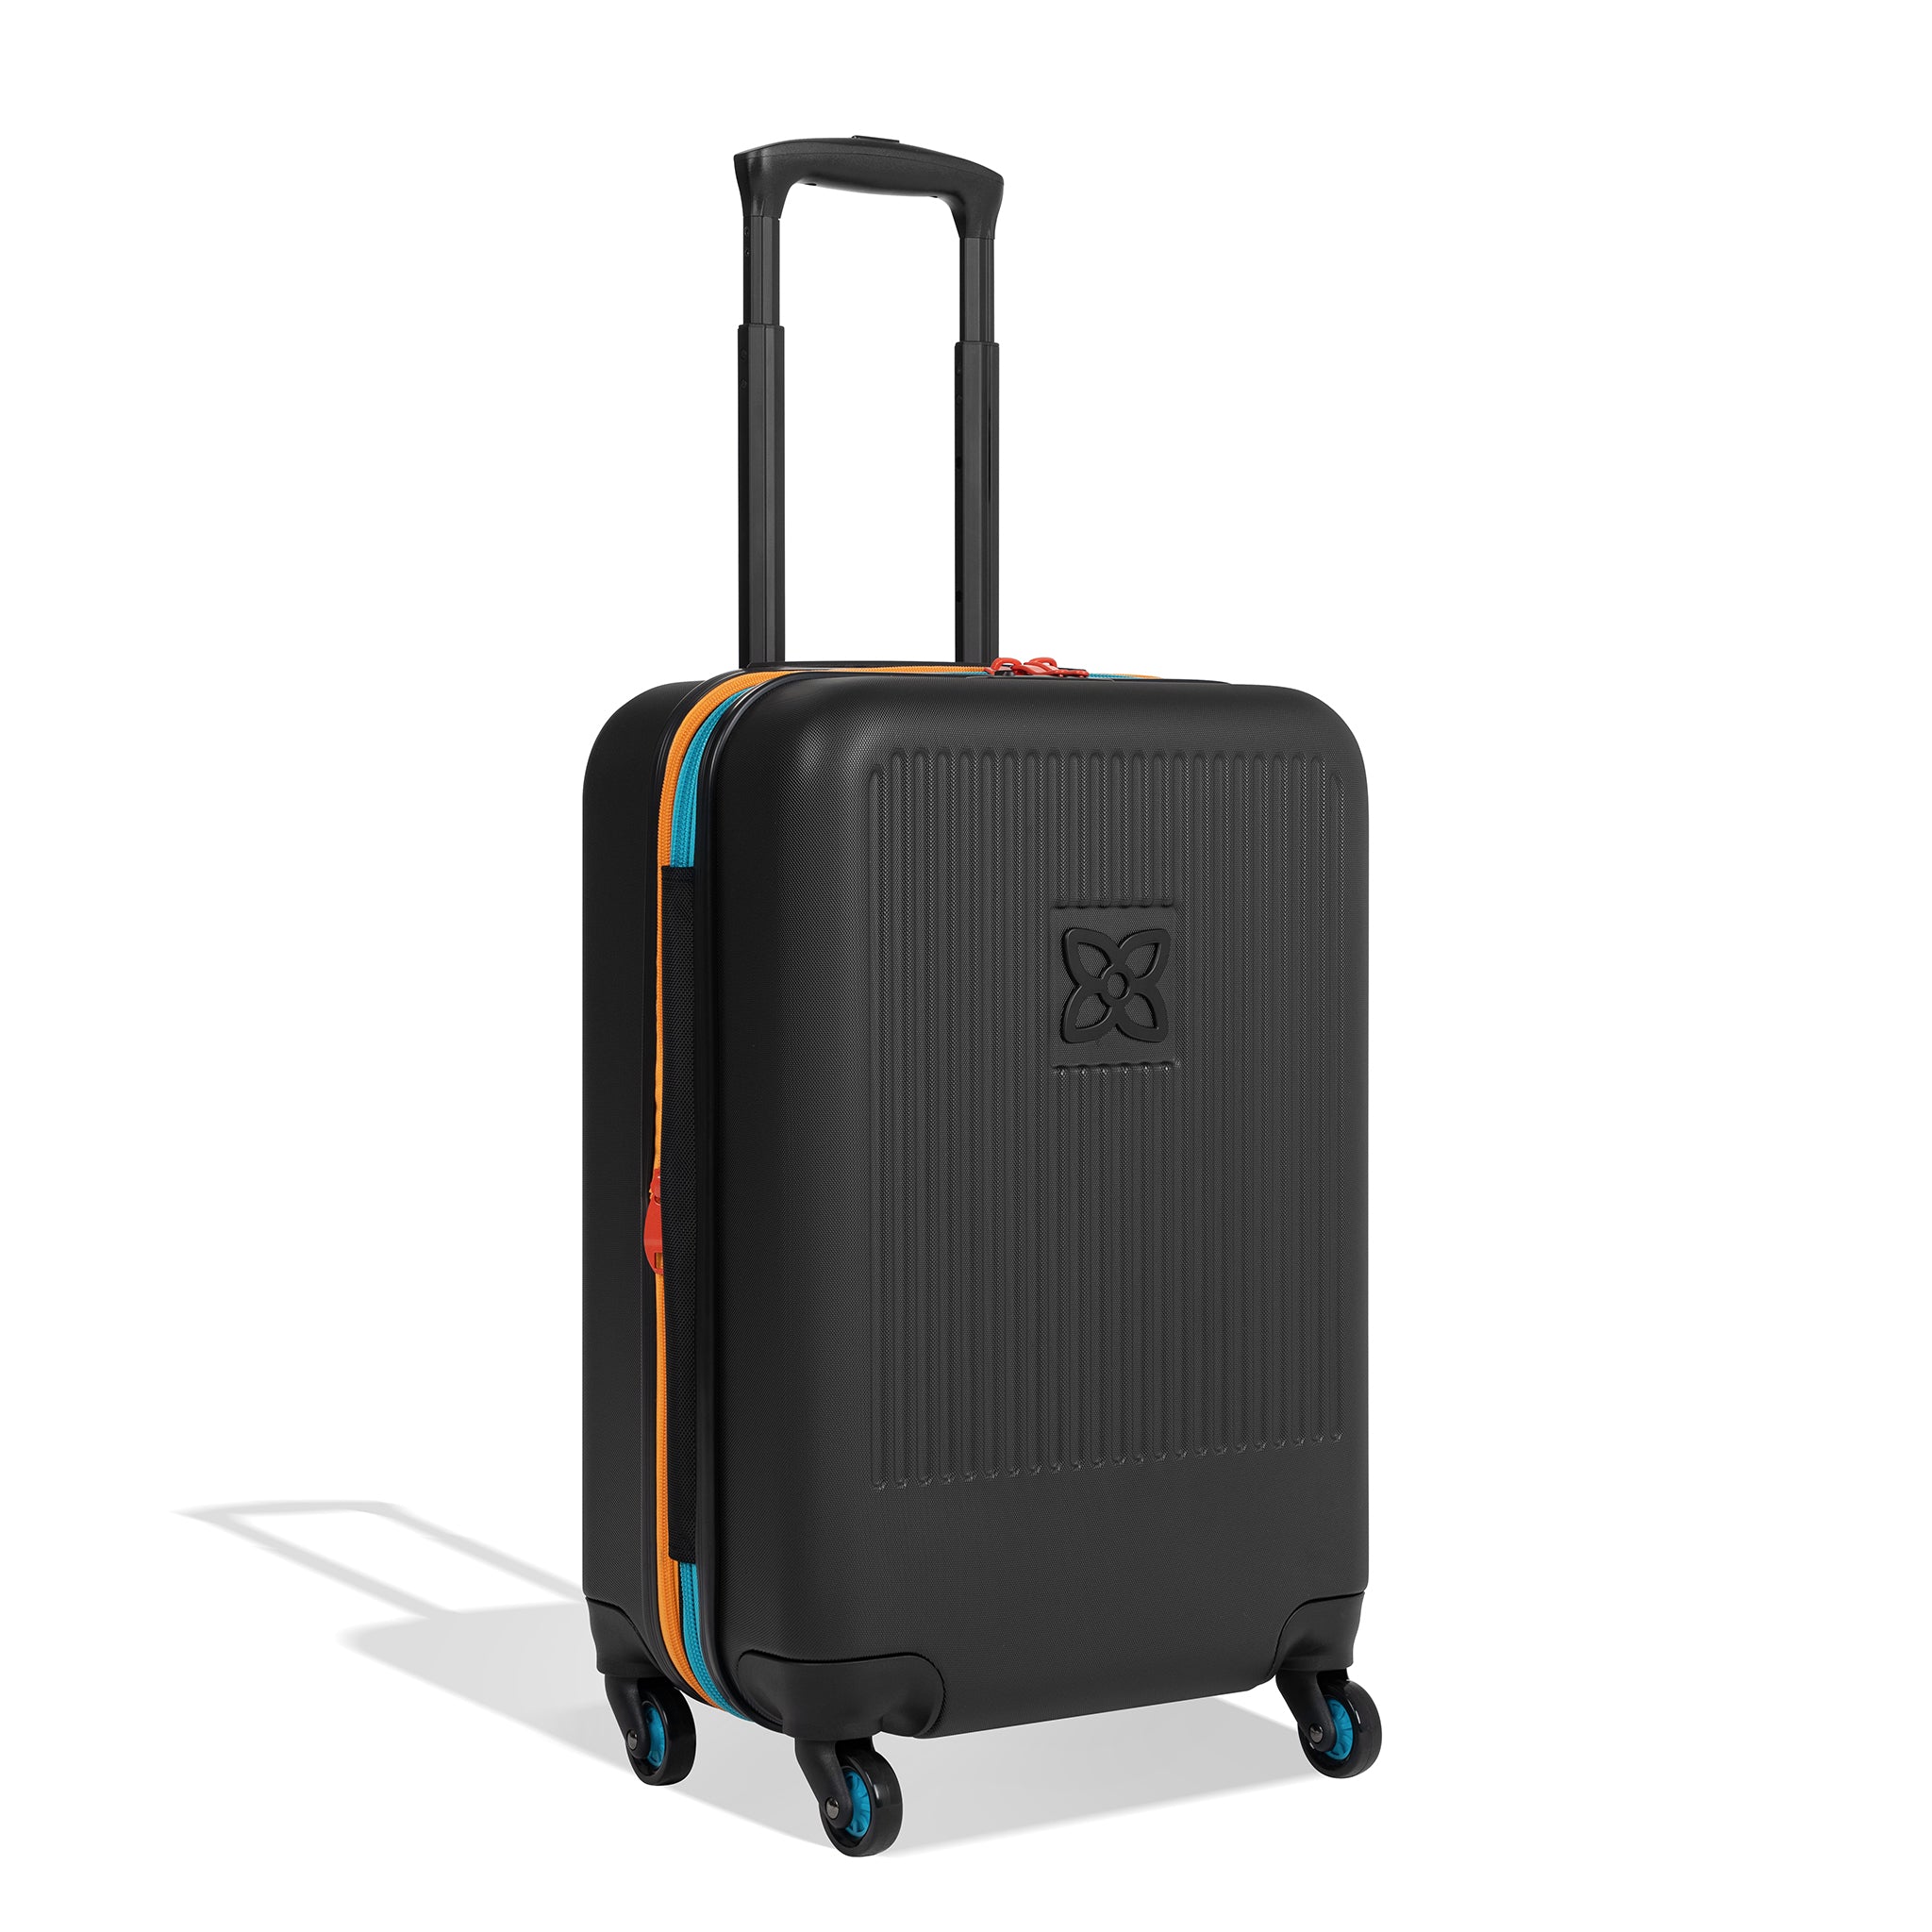 Angled front view of Sherpani hard-shell carry-on luggage, the Meridian in Chromatic. Meridian features include a retractable luggage handle, uncrushable exterior, TSA-approved locking zippers and four 36-degree spinner wheels. Chromatic color is primarily black with pops of color in red, yellow and blue. 